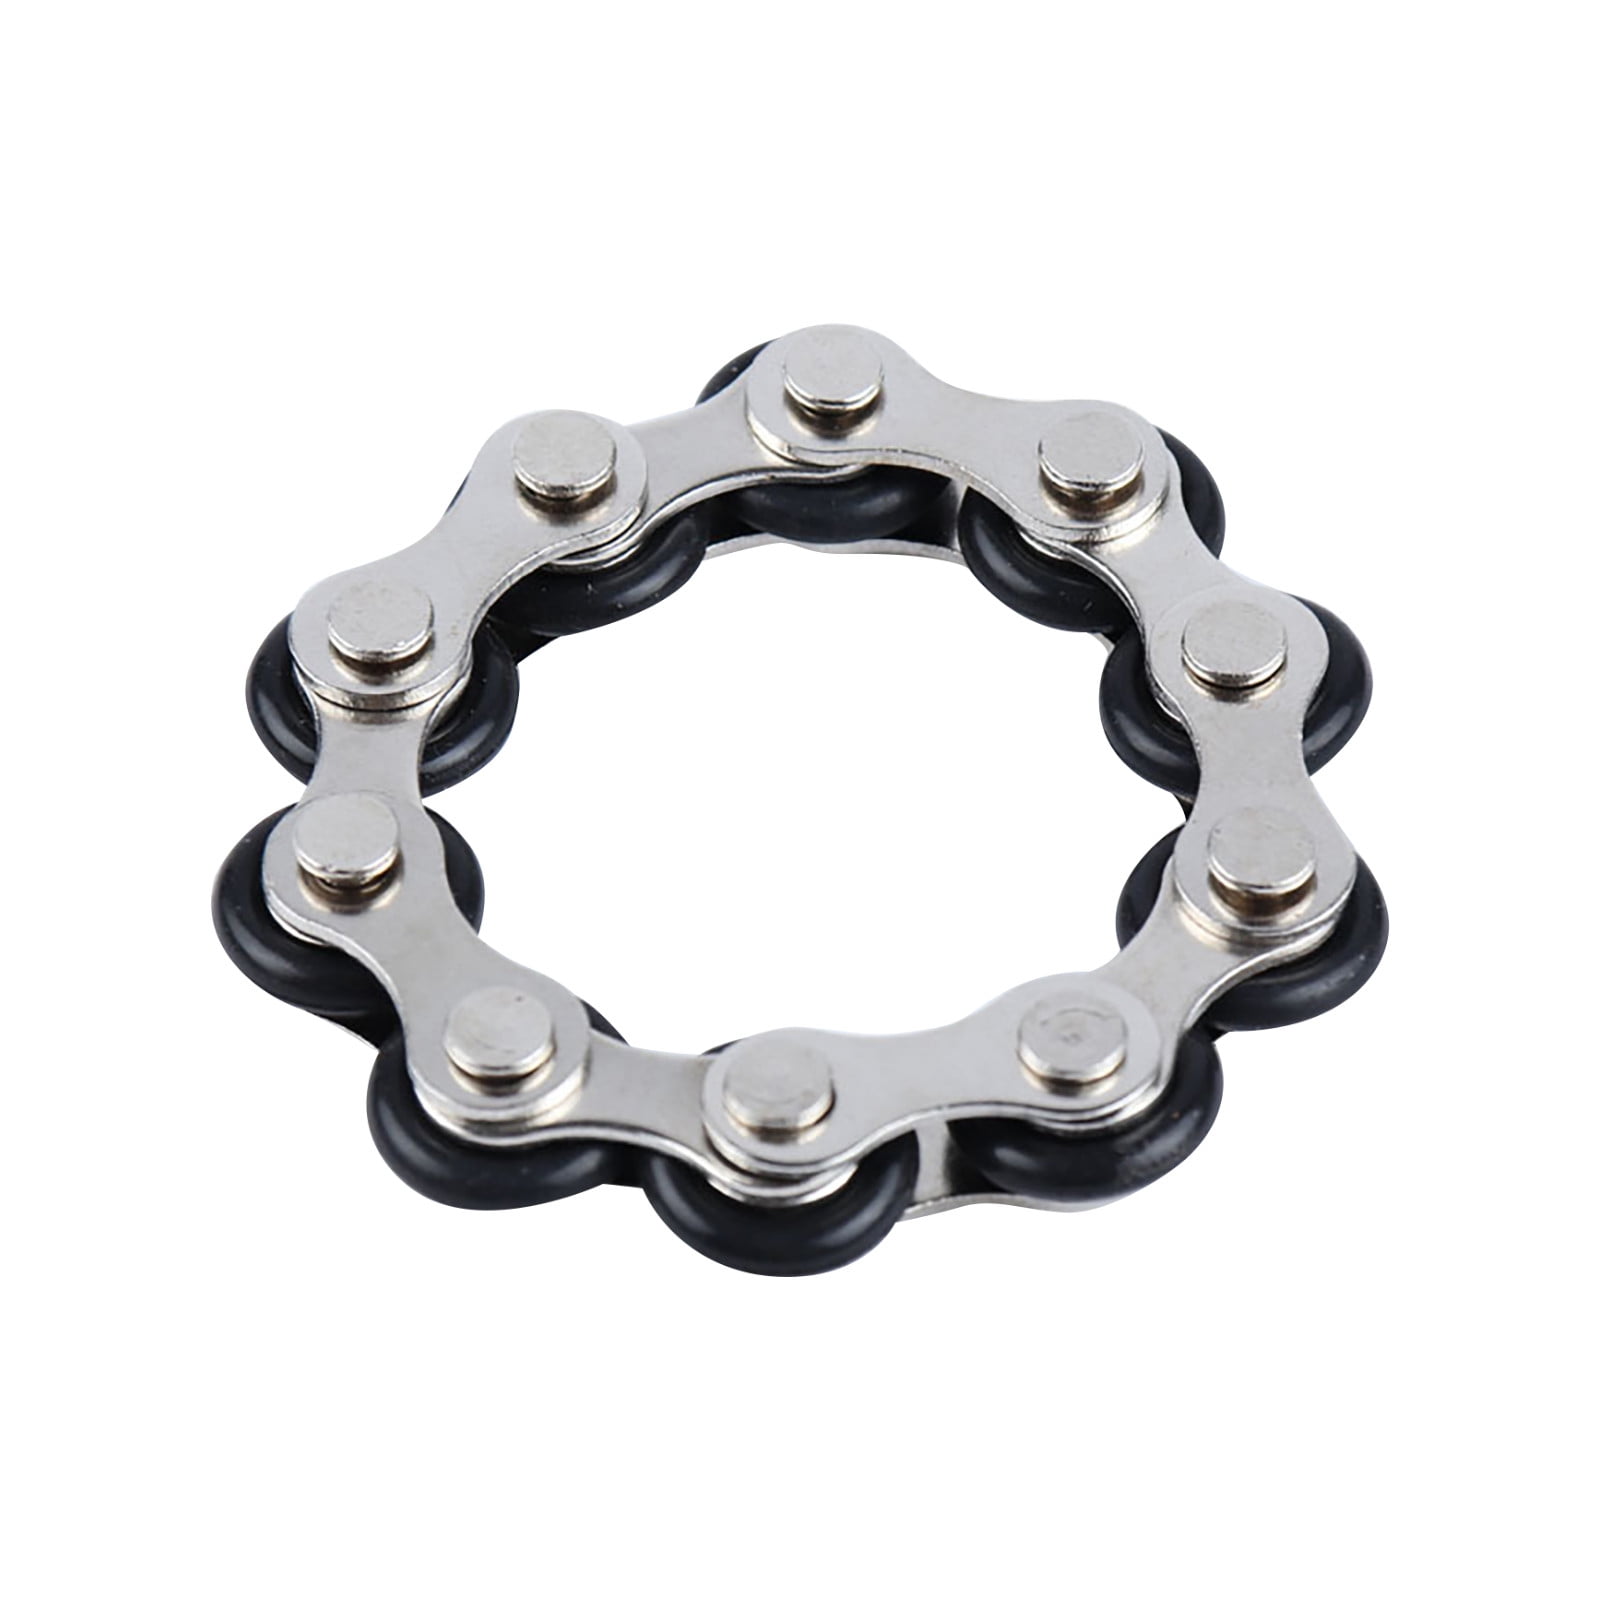 Roller Chain Relief Chain Links Fidget Toy for Anxiety Adults Kids for ADD